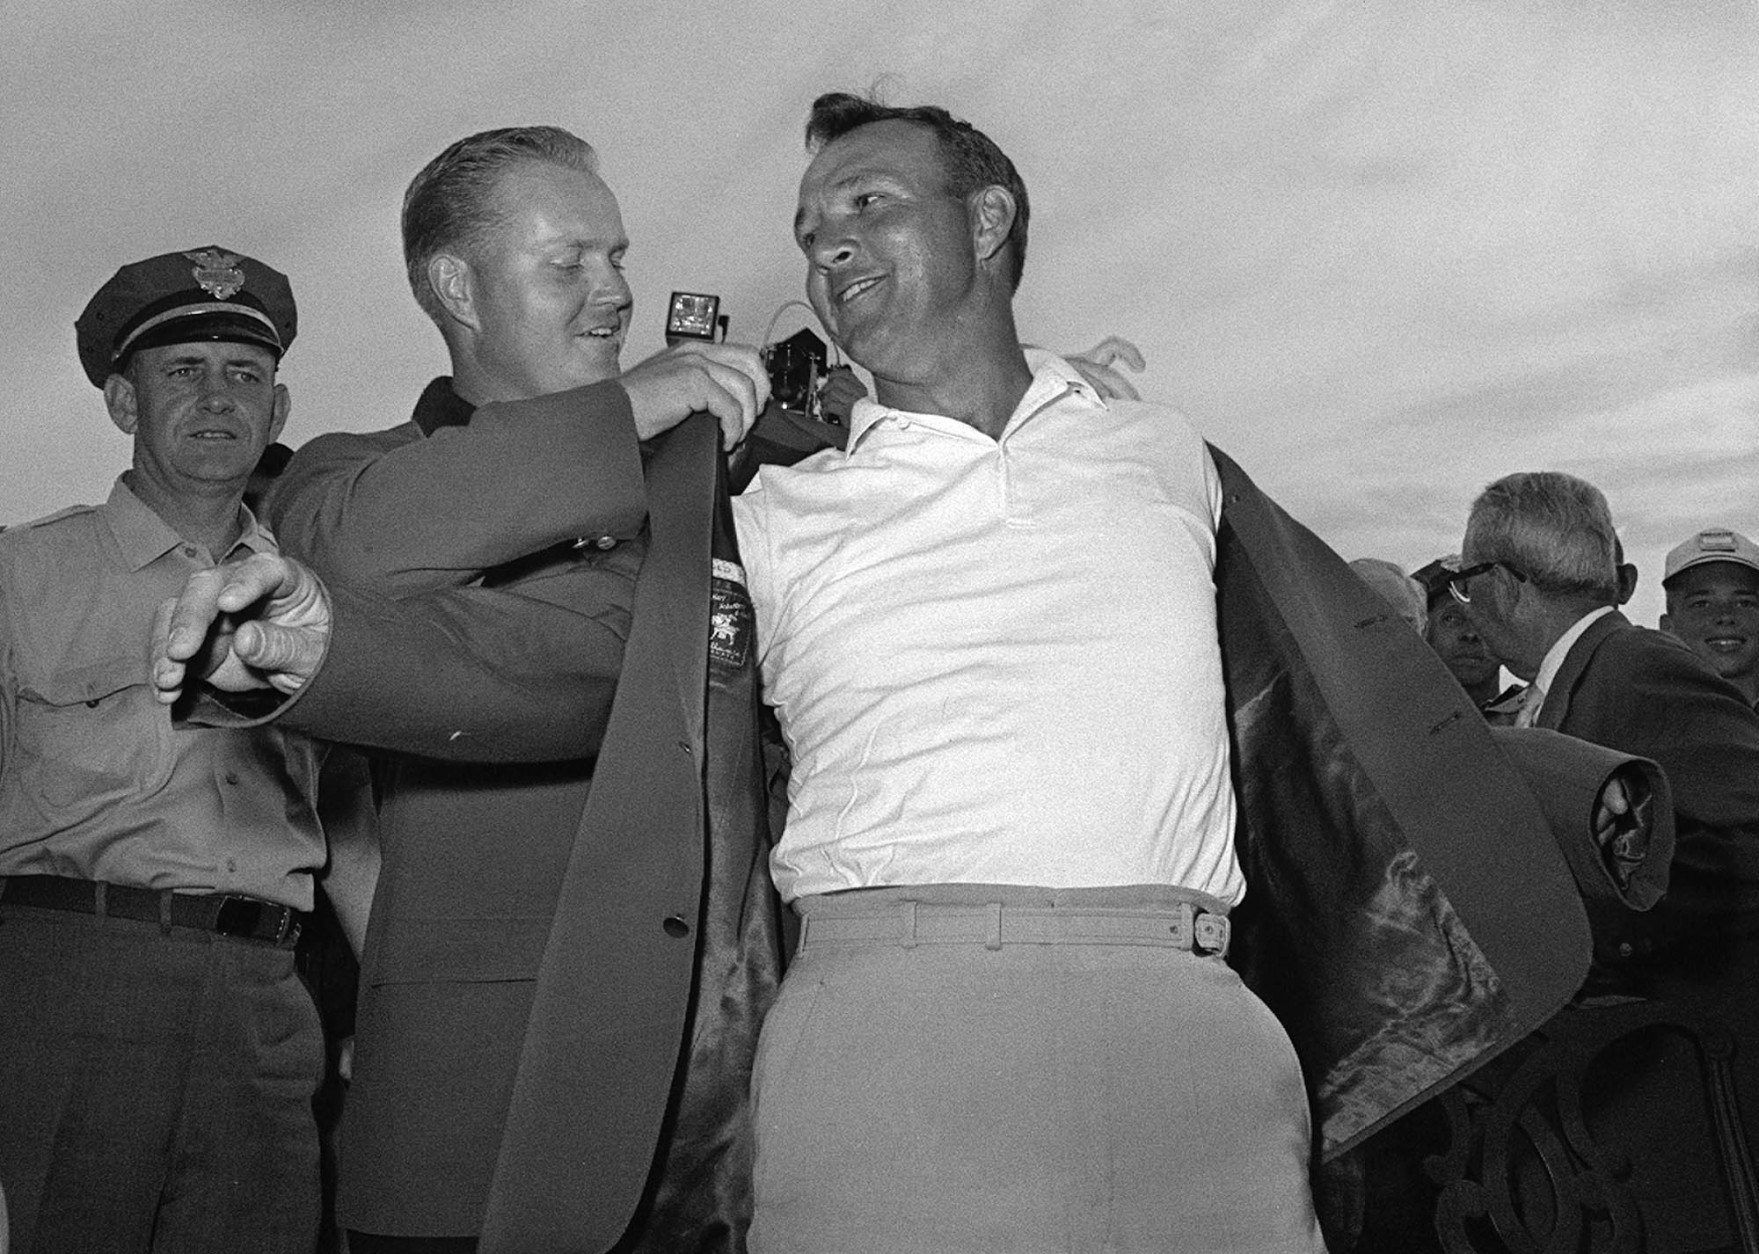 FILE - In this April 12, 1964 file photo, Arnold Palmer, right, slips into his green jacket with help from Jack Nicklaus after winning the Masters golf championship, in Augusta, Ga. Palmer, who made golf popular for the masses with his hard-charging style, incomparable charisma and a personal touch that made him known throughout the golf world as "The King," died Sunday, Sept. 25, 2016, in Pittsburgh. He was 87.  (AP Photo/File)